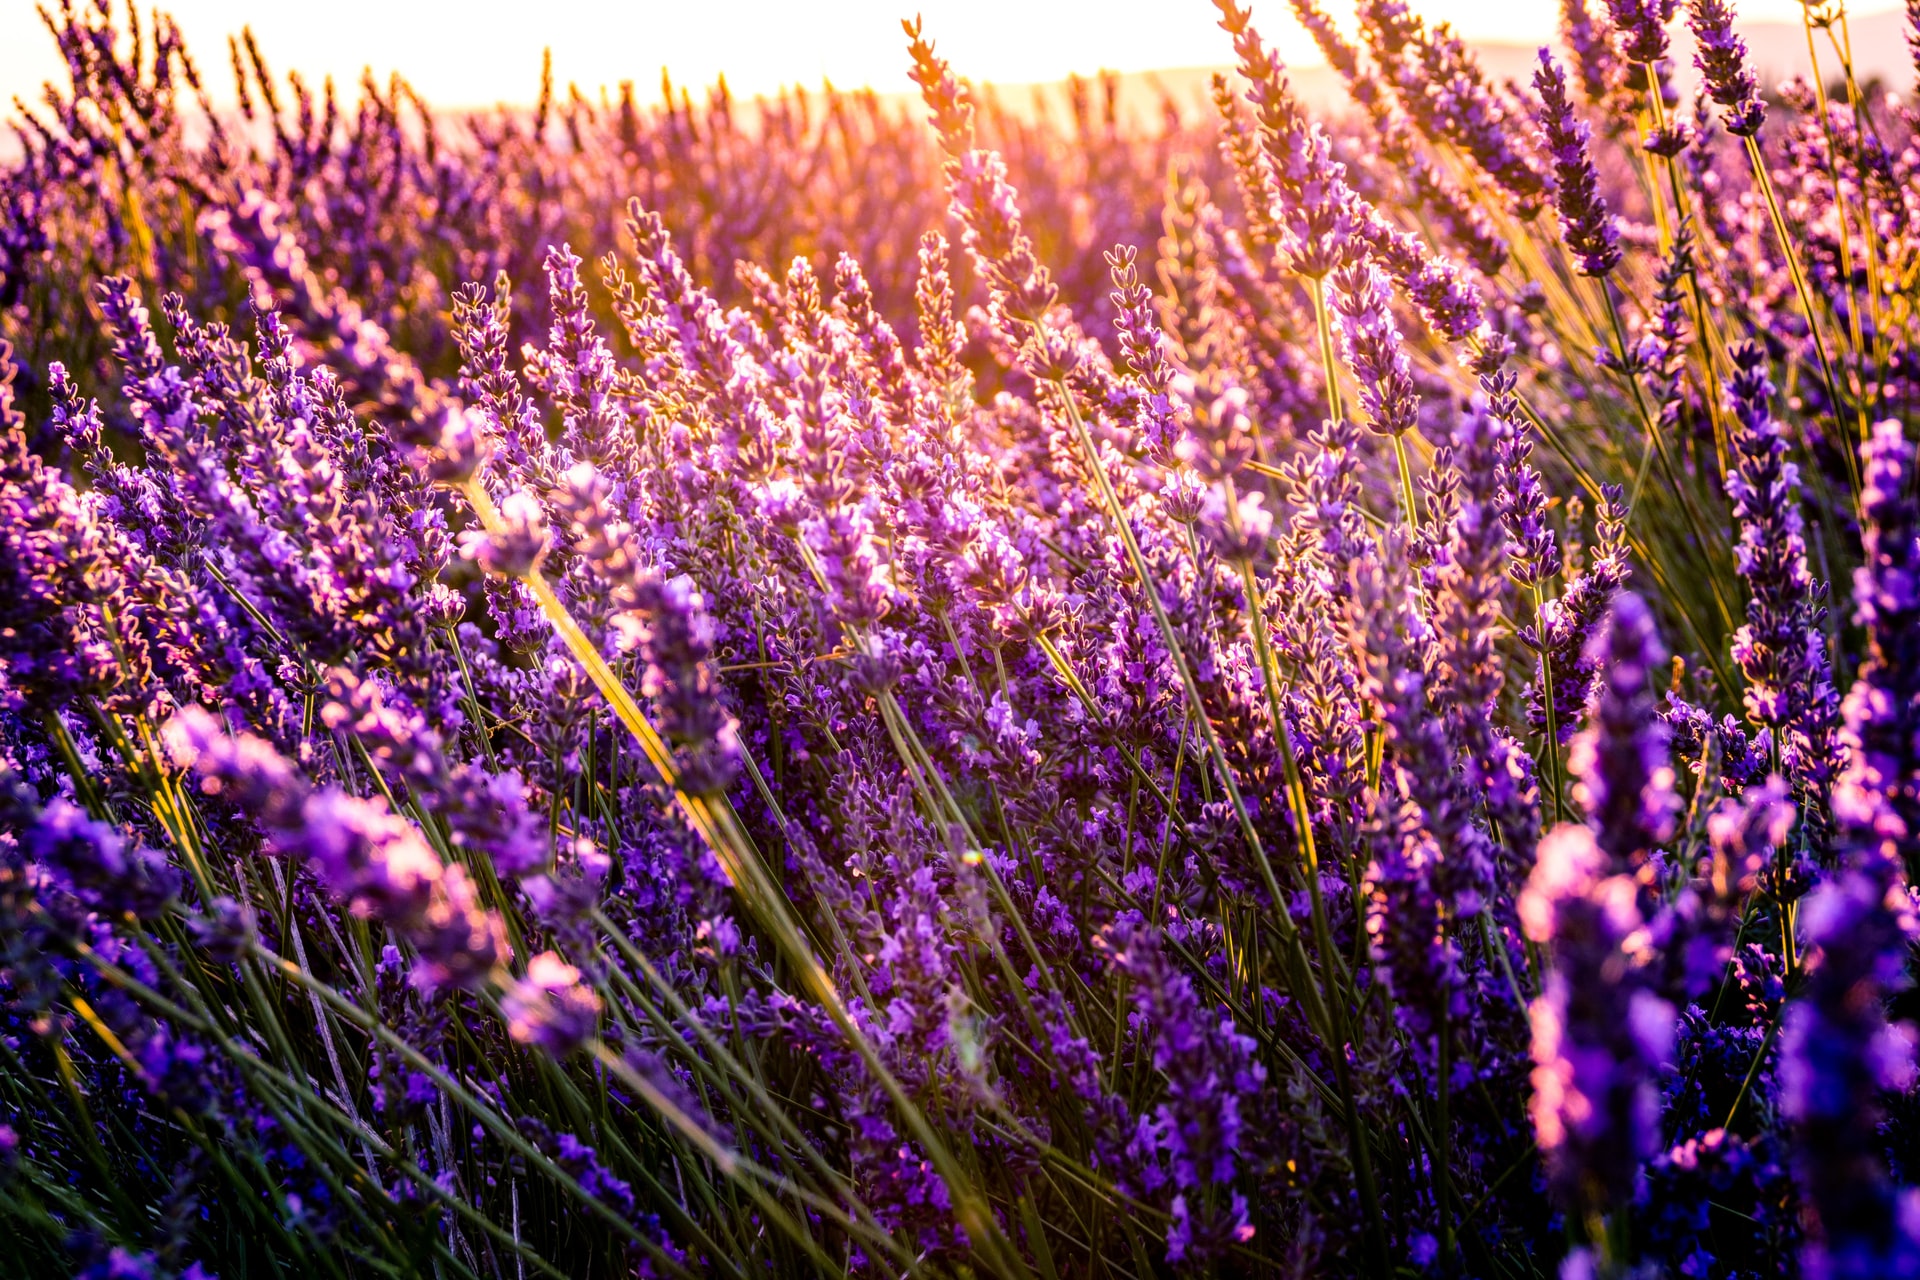 Ever wonder what it means when Lavender enters your life as a spiritual sign? Inside, I talk about the spiritual meaning of Lavender. #naturespirit #lavender #lavenderessentialoil #essentialoils #plantcompanions #consciousliving #spiritualpath #spiritualsigns #spiritualmessage #spiritualawakening #spirituality #plantmeaning #plantspirit #lavenderspirit